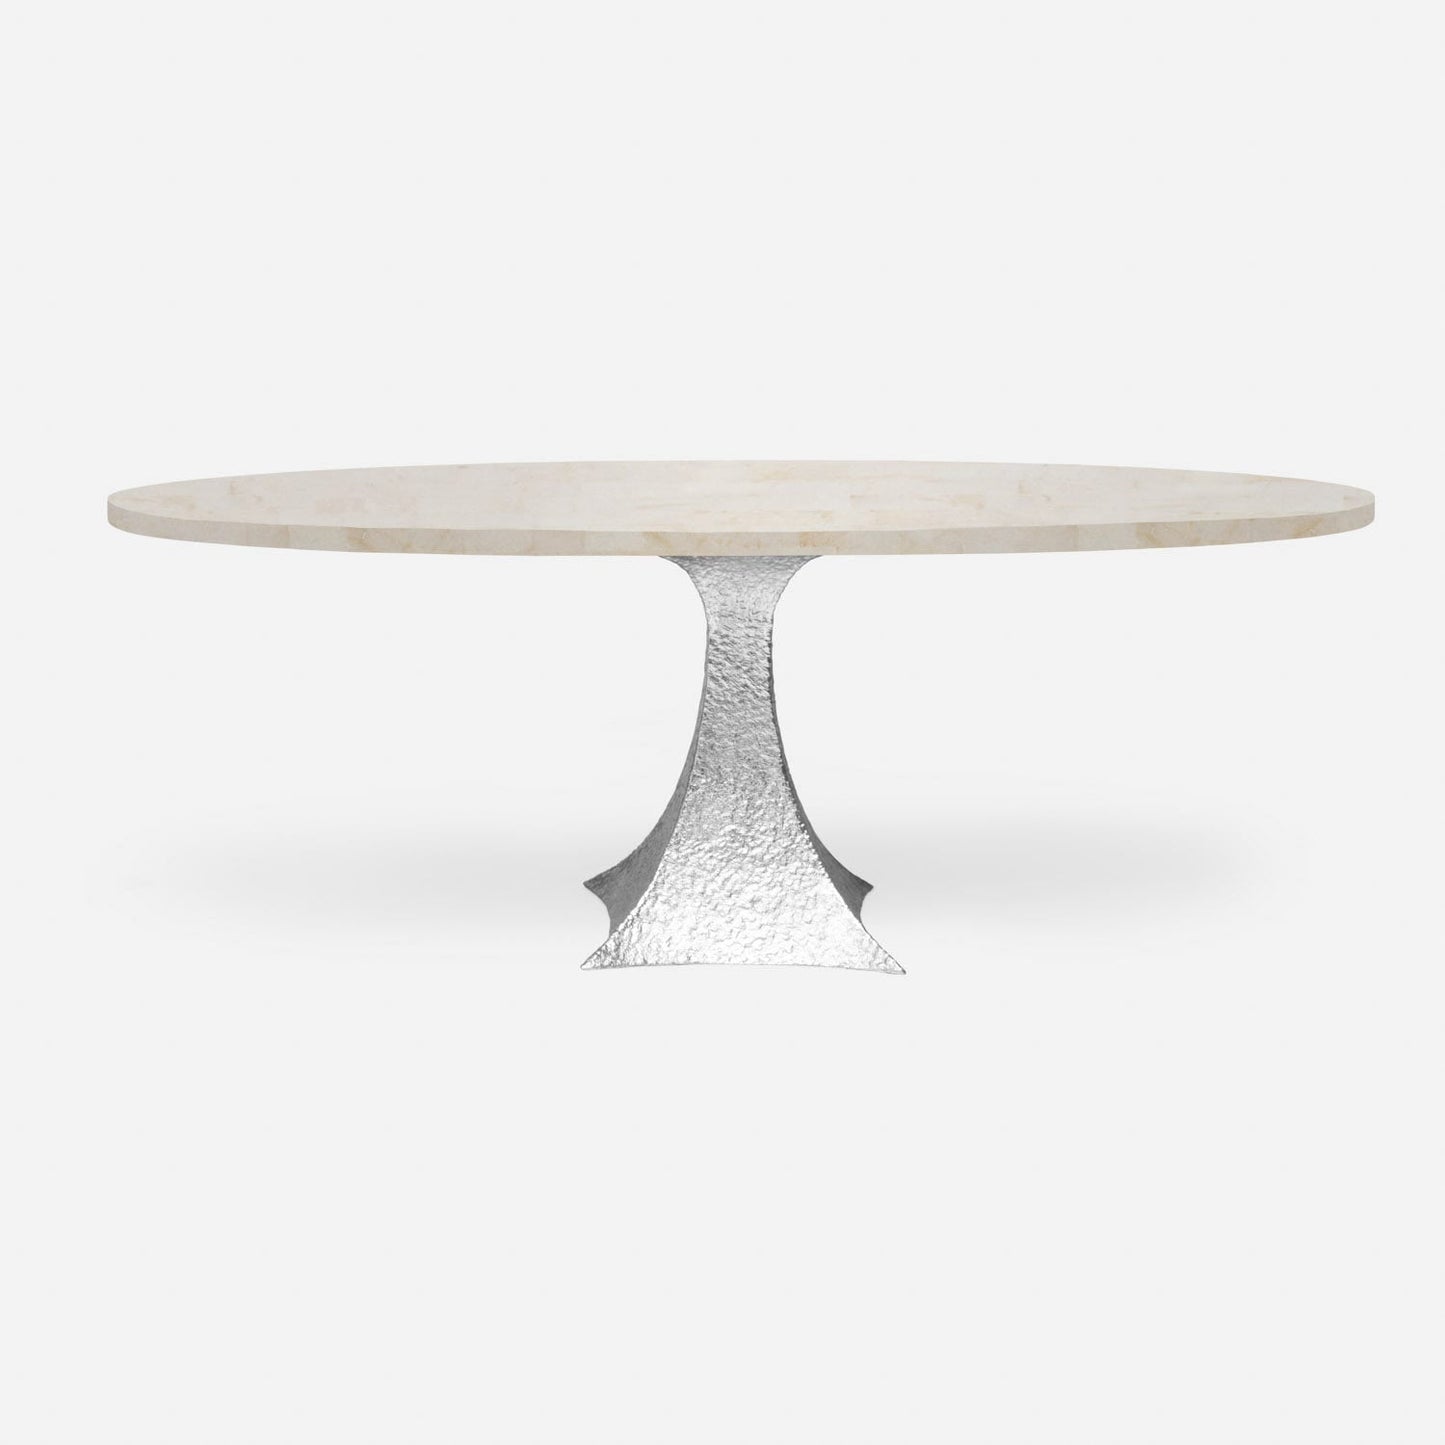 Made Goods Noor 96" x 44" x 30" Double Base Bumpy Cool Silver Iron Dinning Table With Oval Gray Romblon Stone Table Top